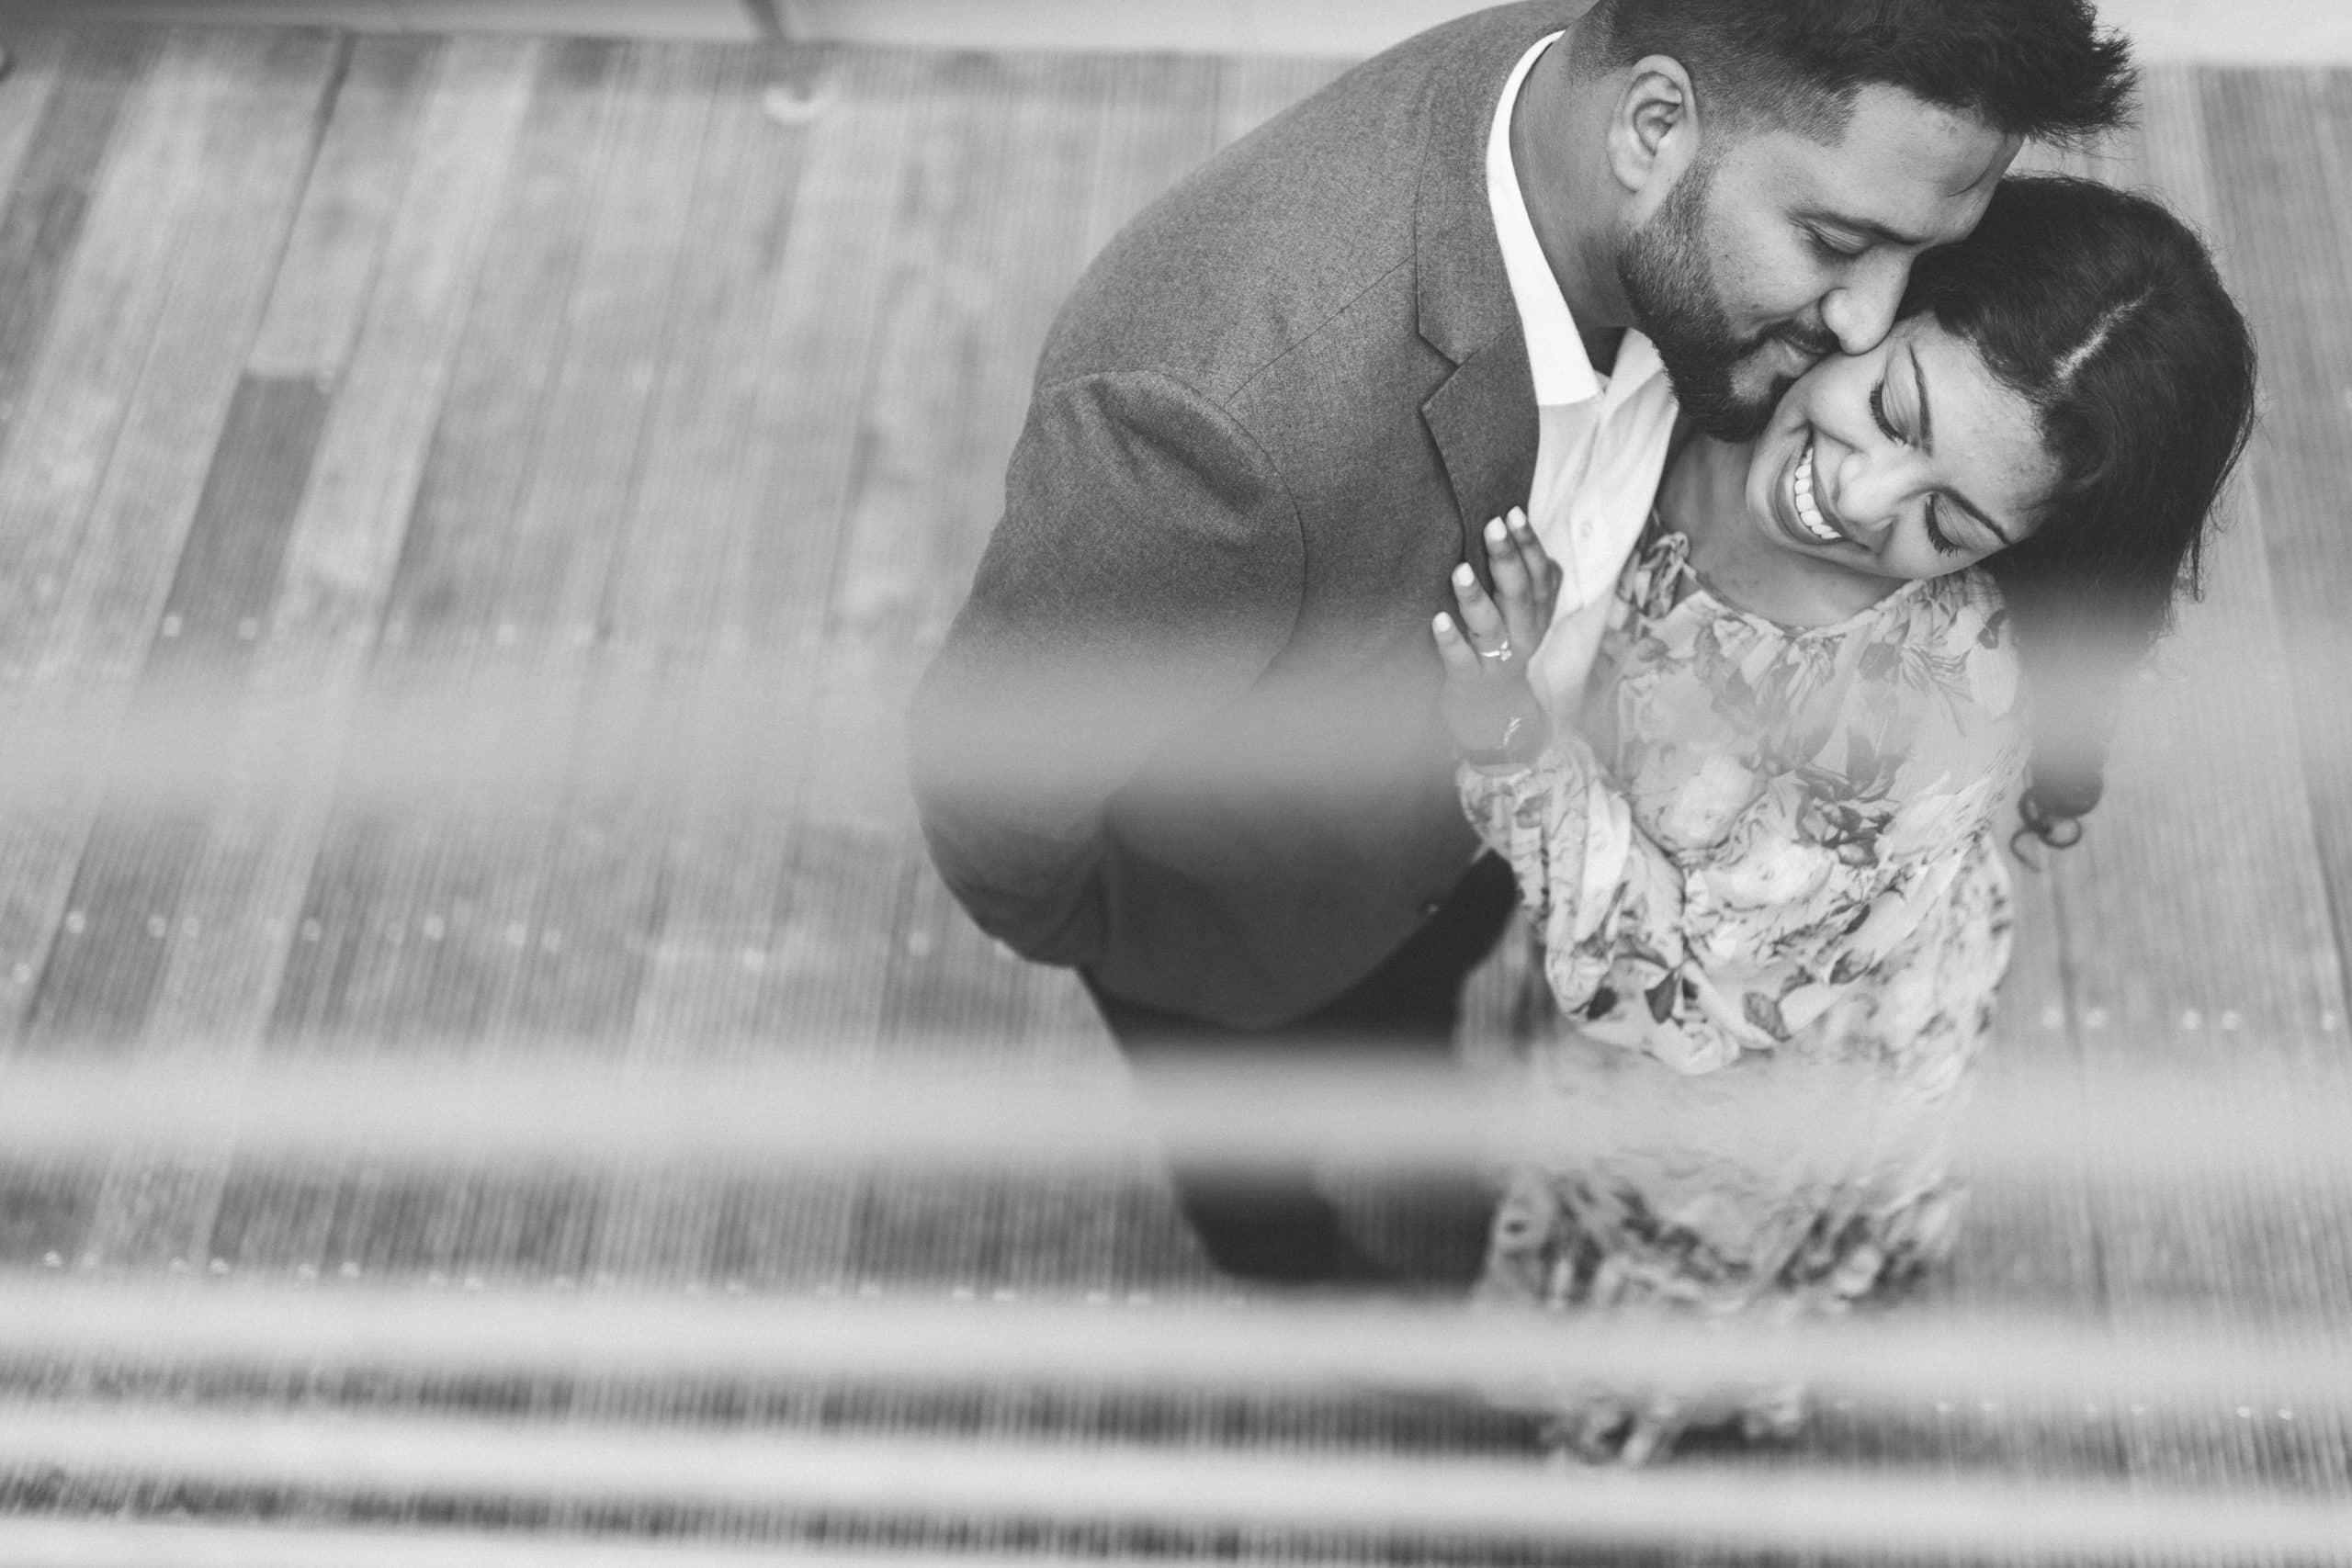 NYC engagement session in the Meatpacking District and South Street Seaport, captured by NYC wedding photographer Ben Lau.